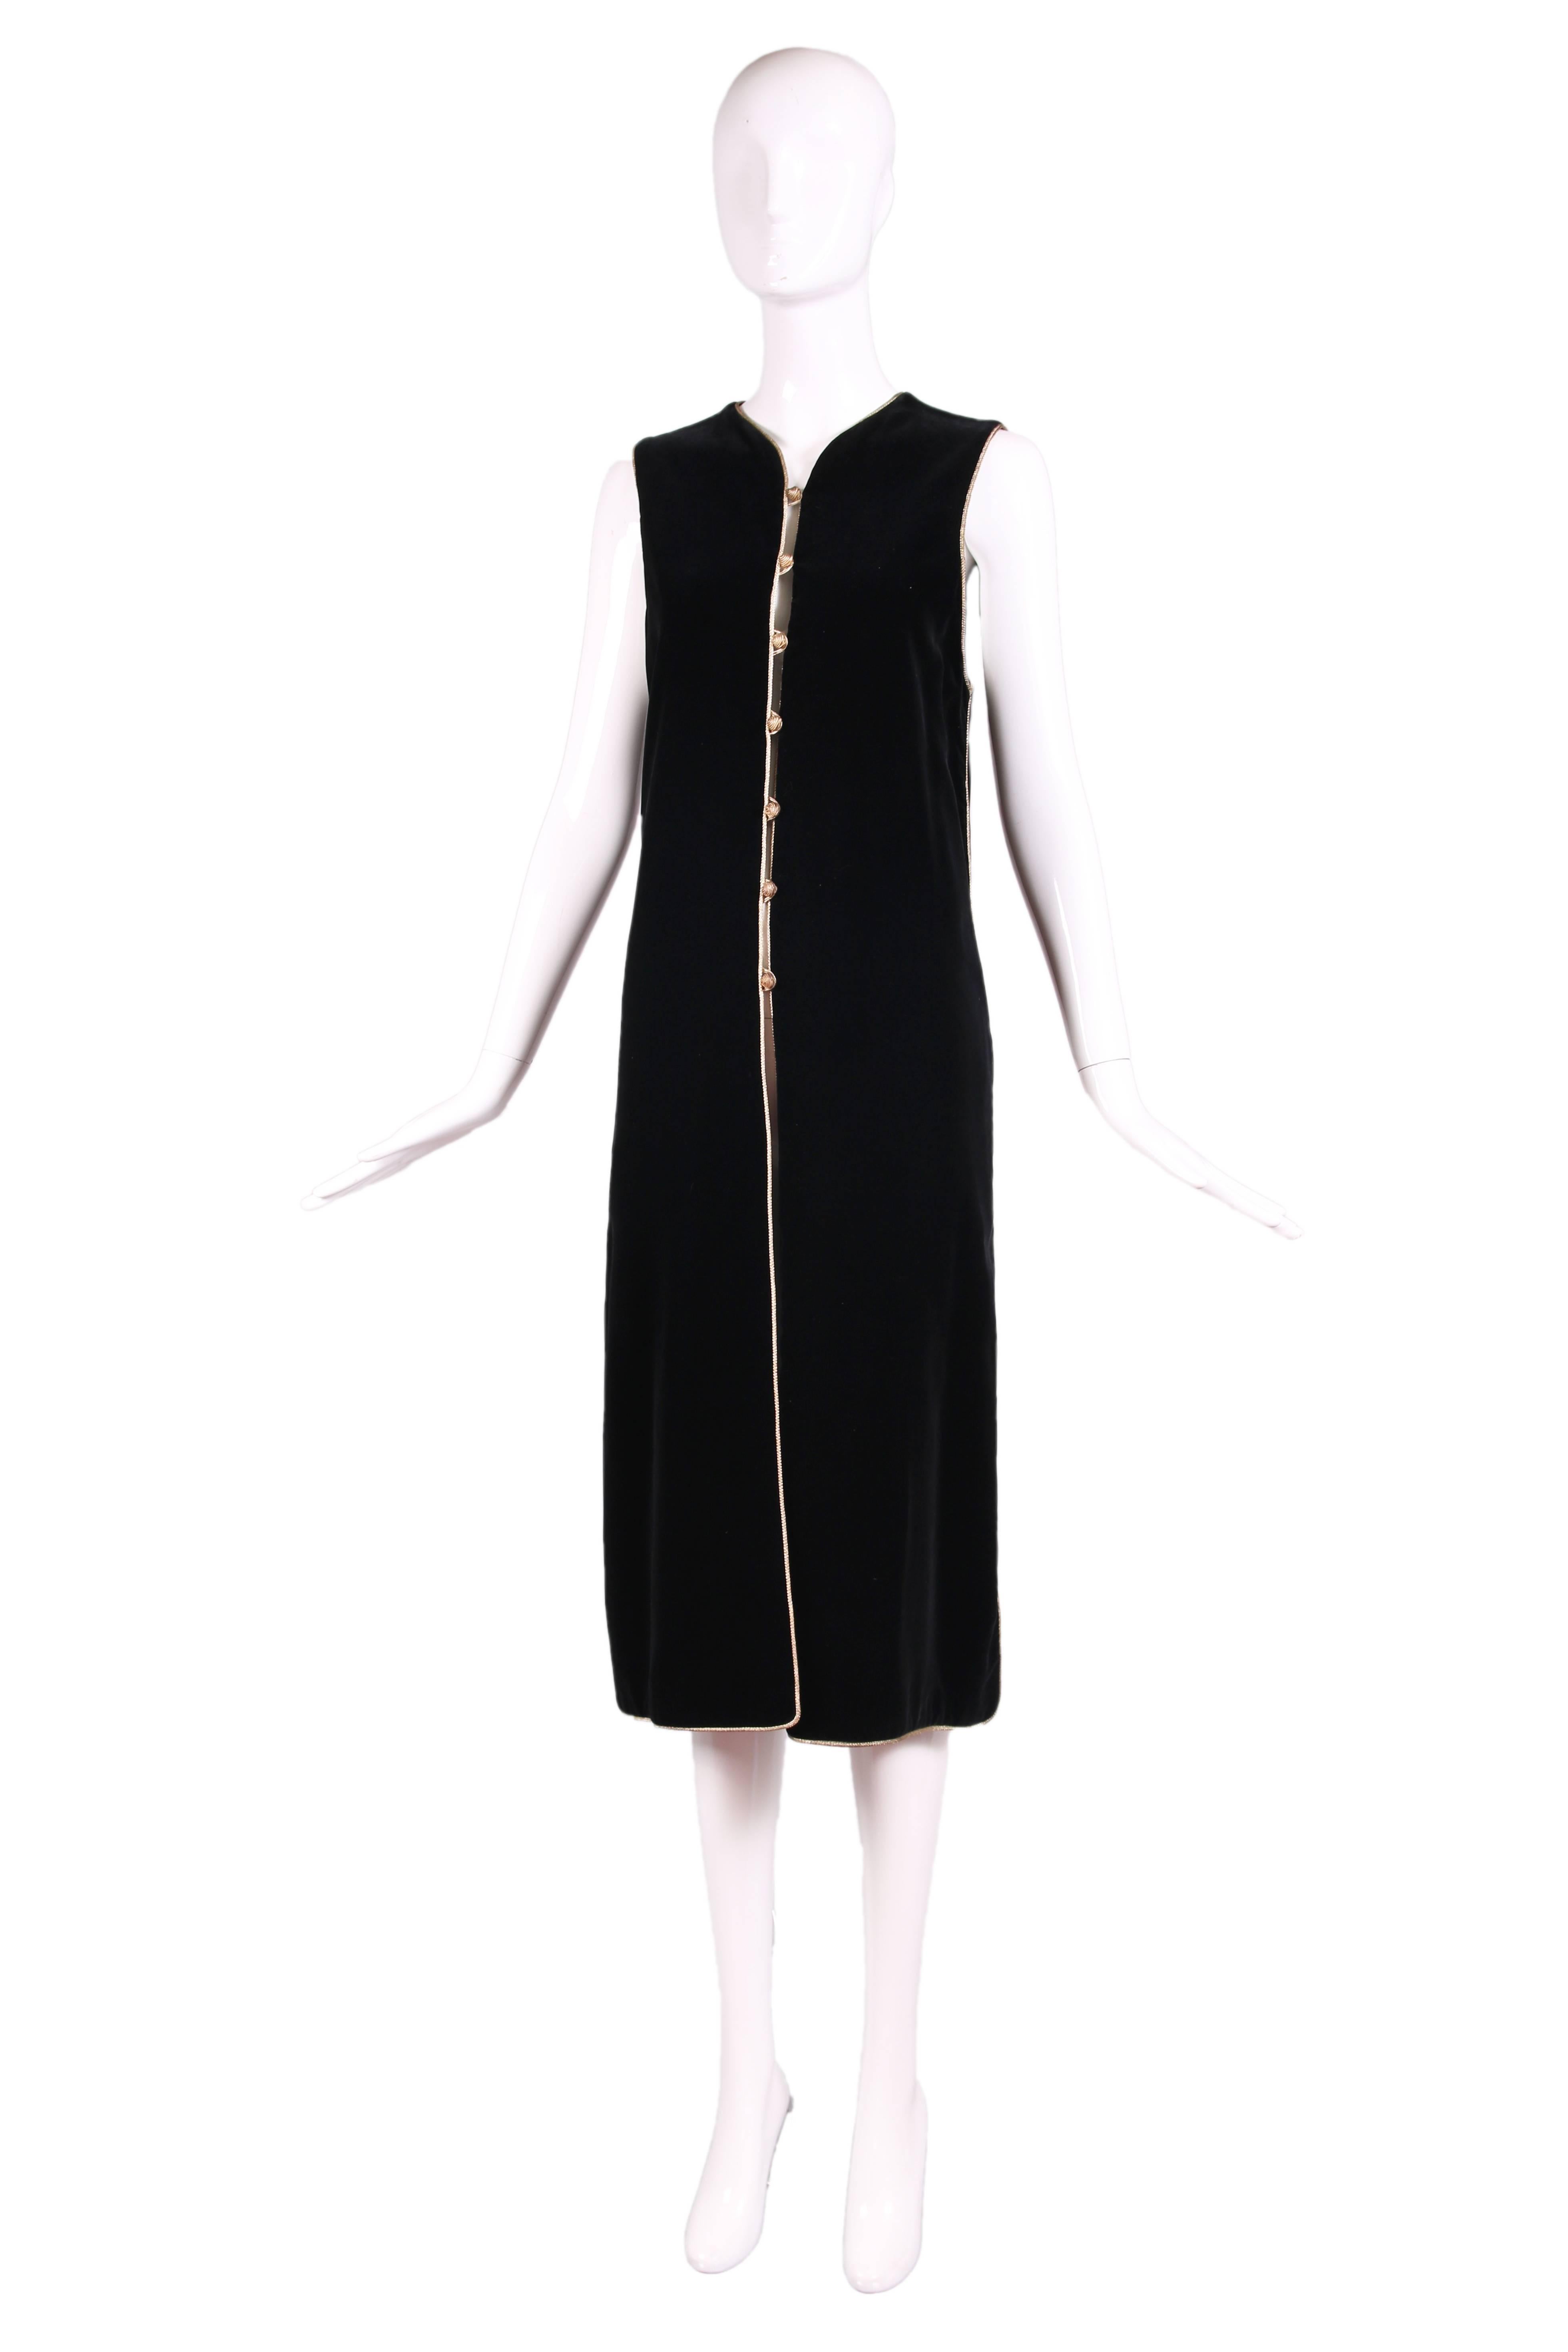 1976/1977 Yves Saint Laurent 'Opera - Ballets Russes' Collection black velvet tunic vest with gold lurex trim and button closure down center front. Slits on each side. Fully lined. In excellent condition. No size tag, please consult